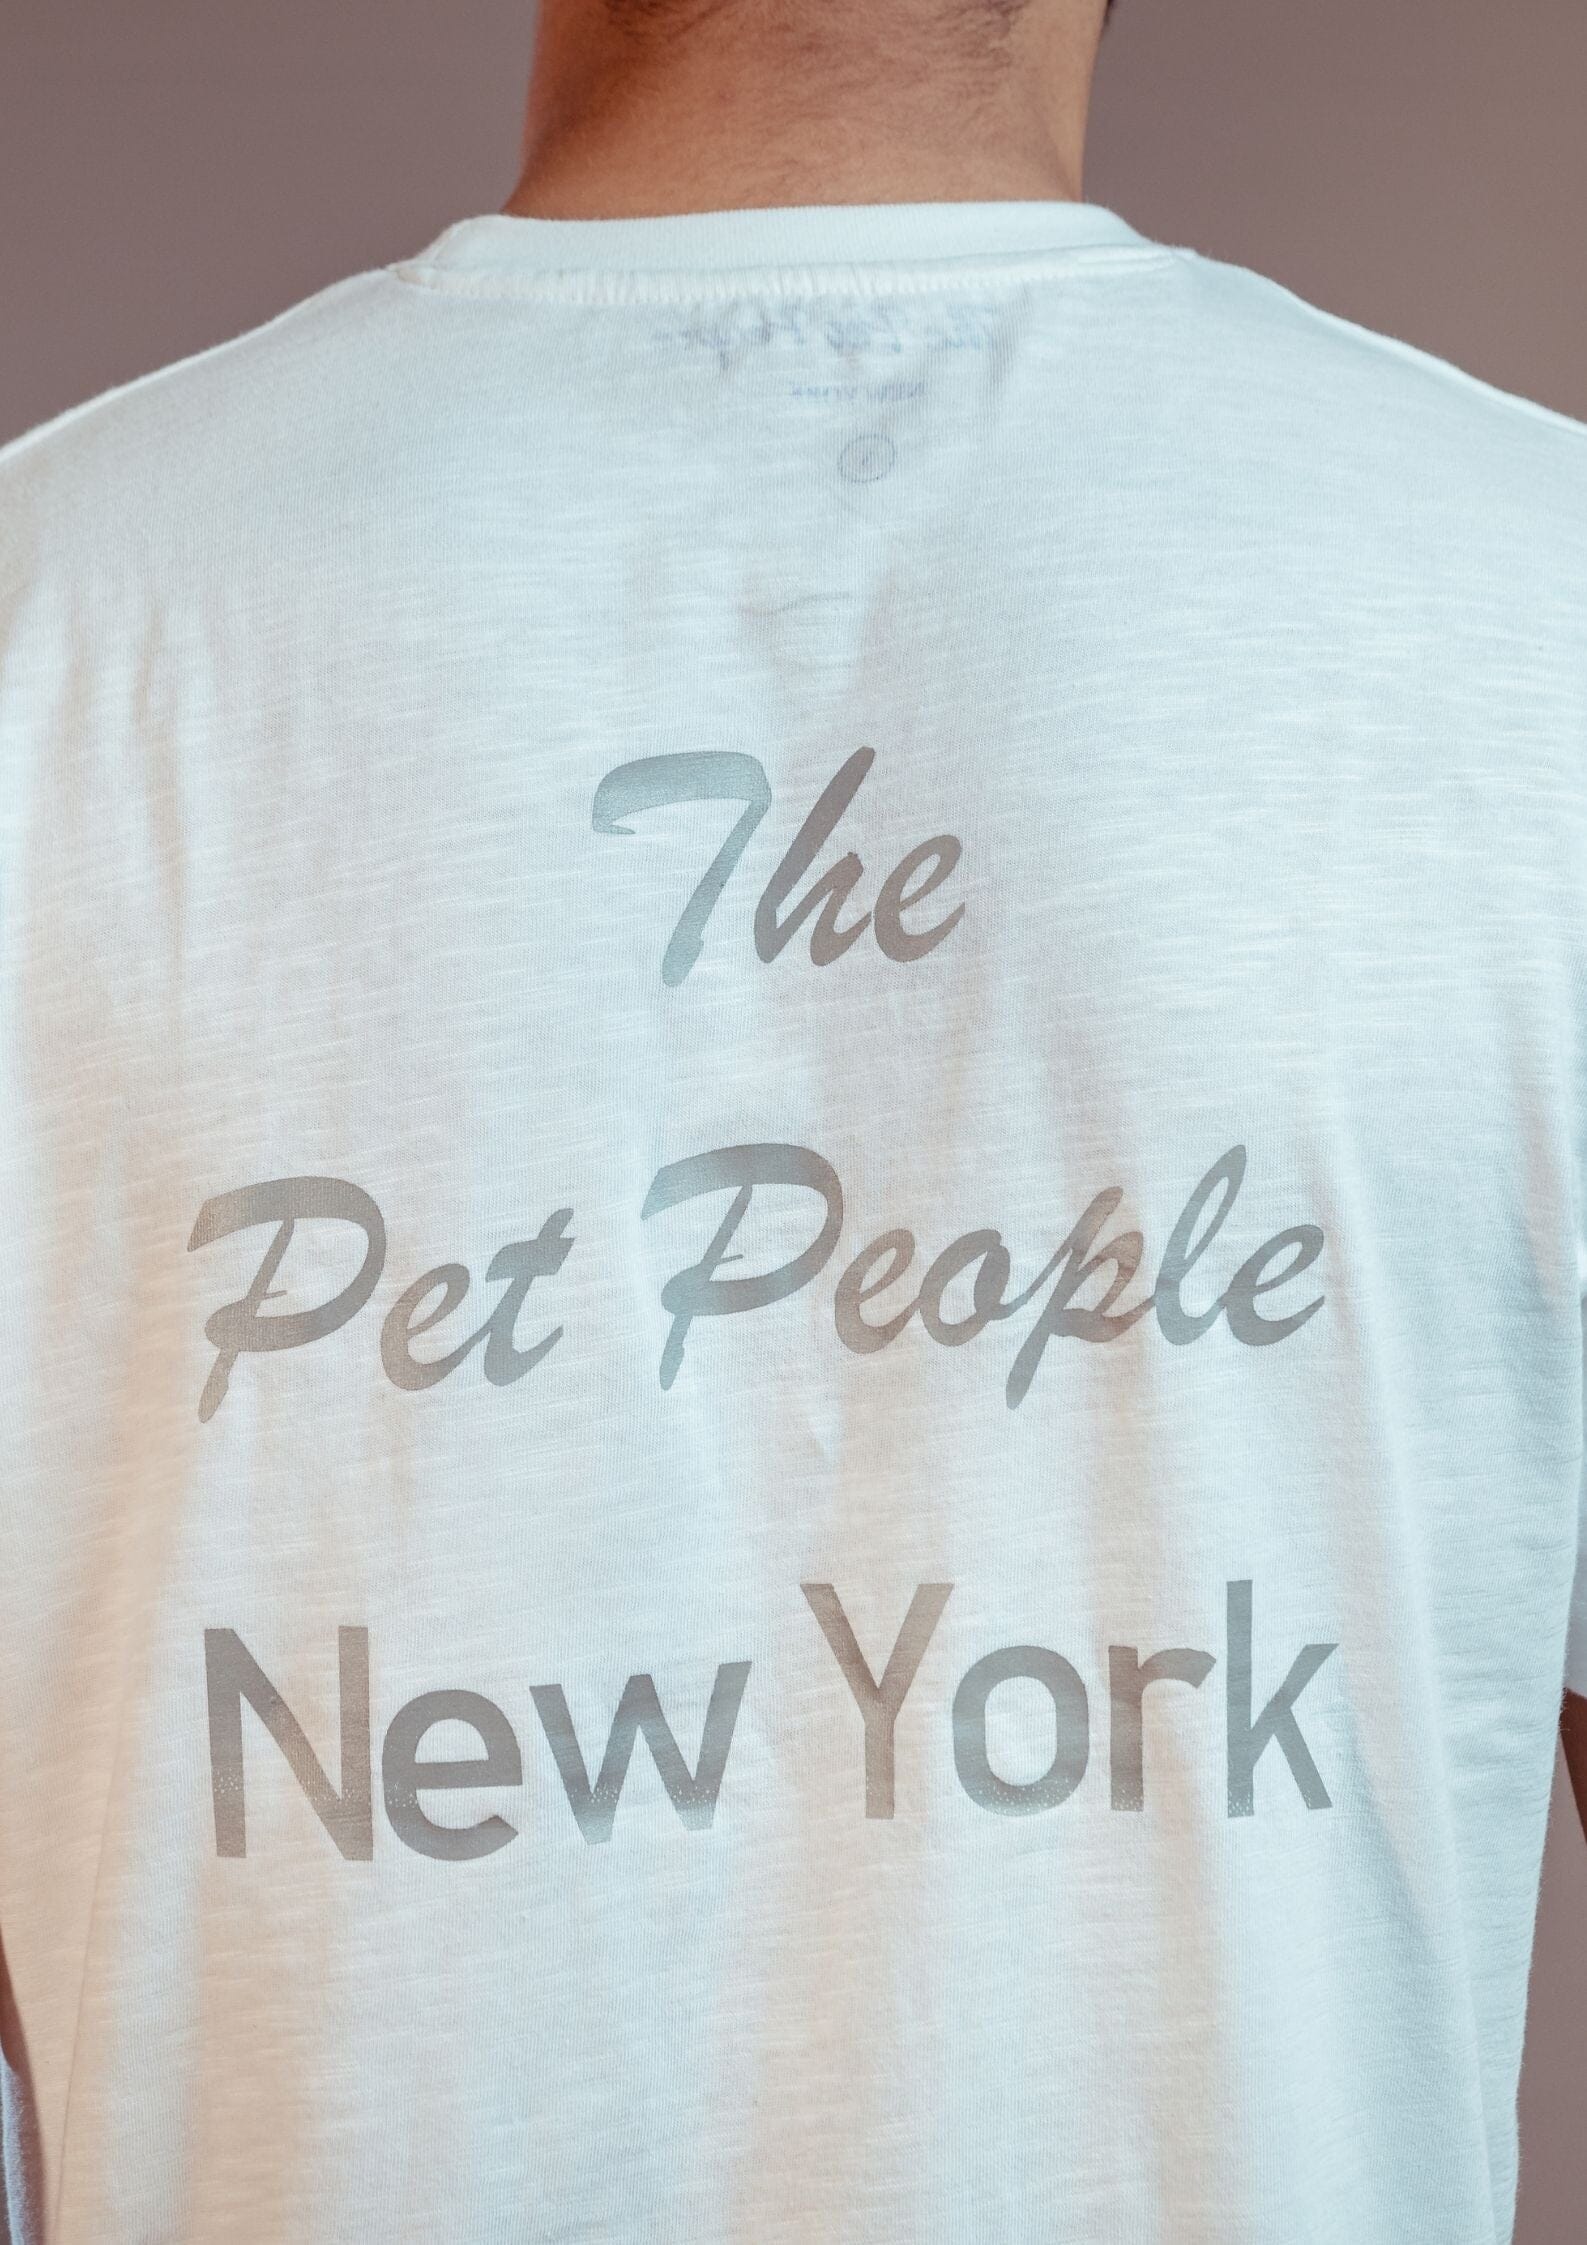 BEST FRIEND T-Shirt Shirts & Tops ThePetPeopleCafe 